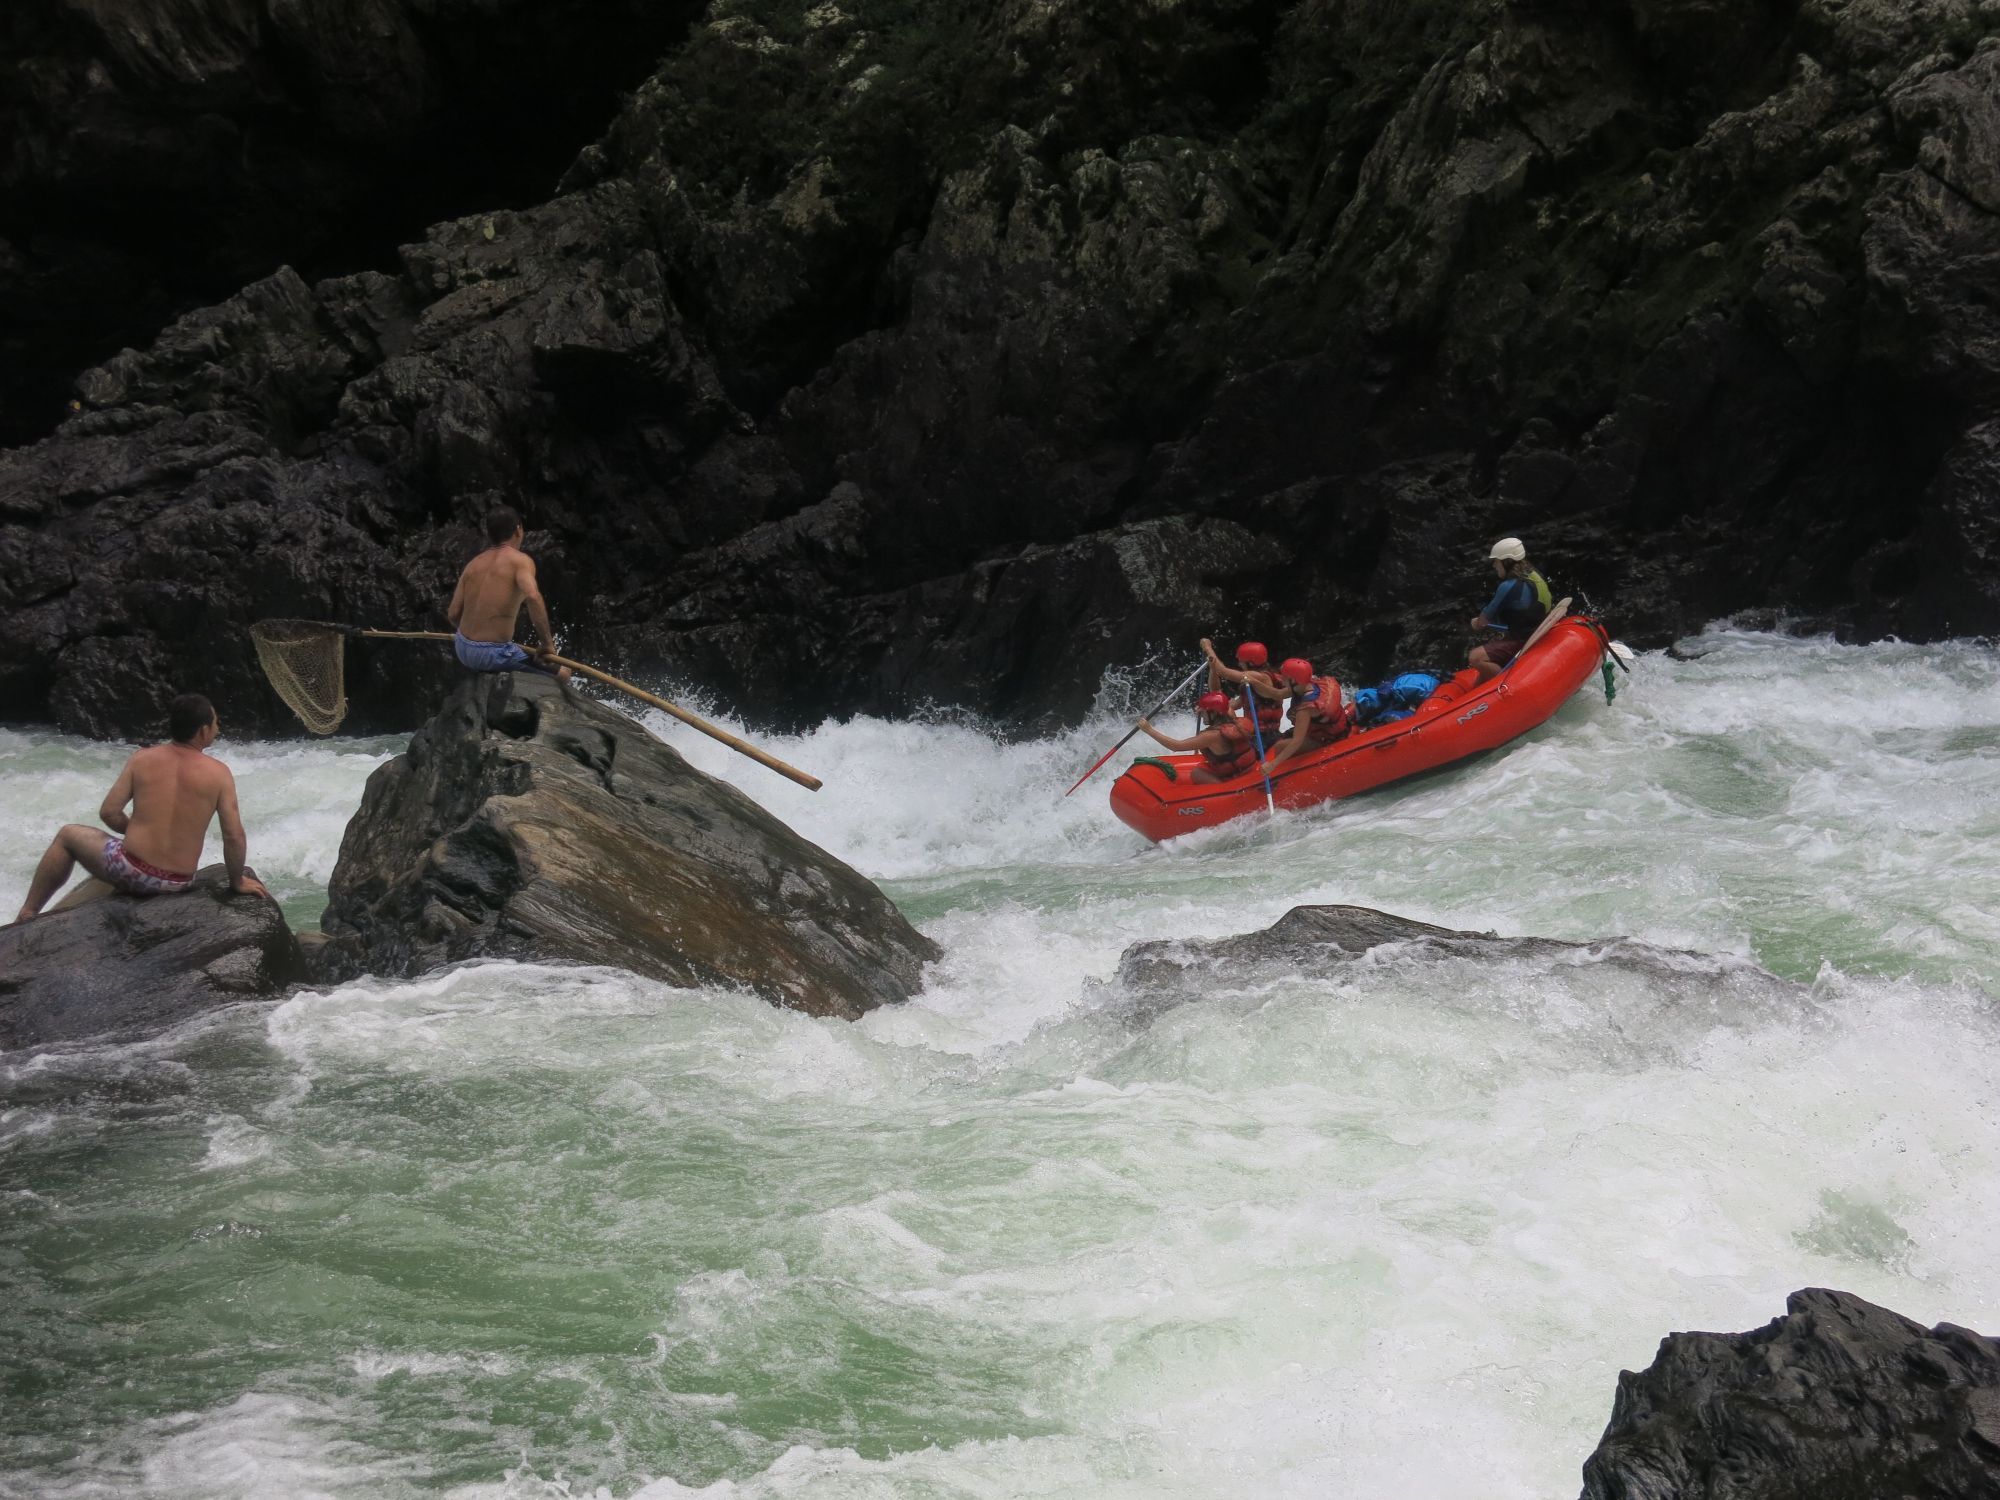 A rafting group on the little-known Samana River, in Colombia